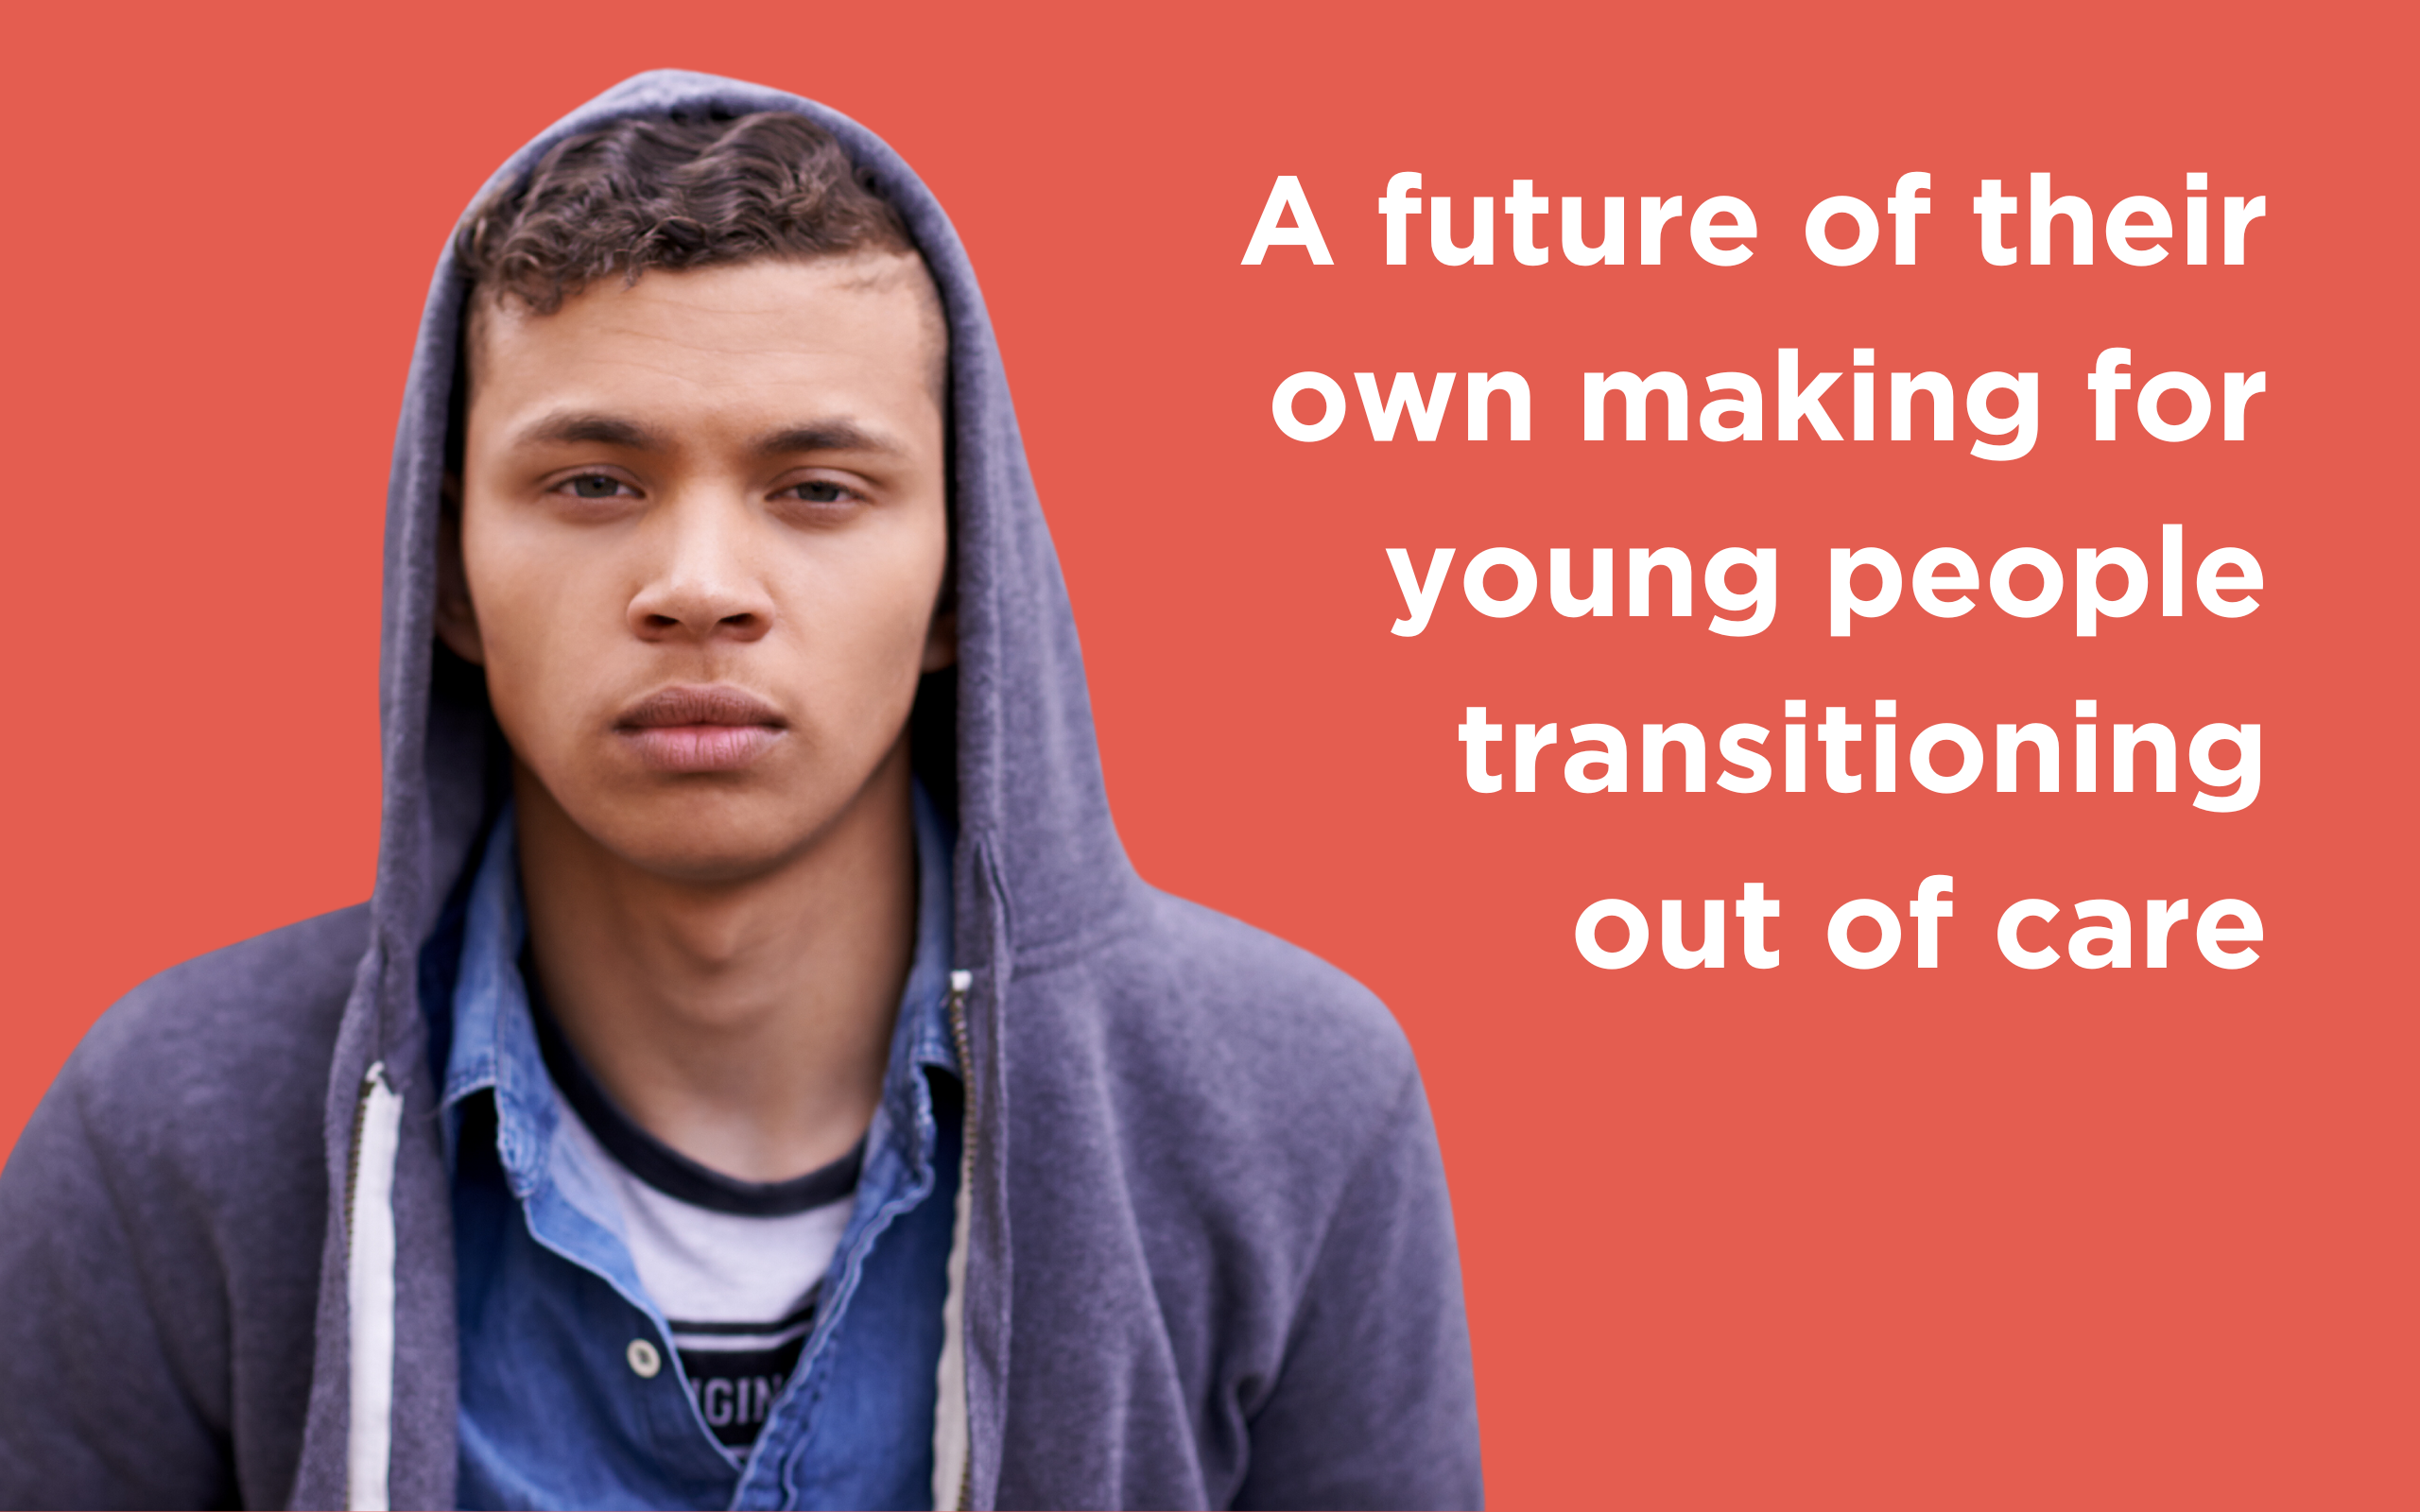 A future of their own making for young people transitioning out of care